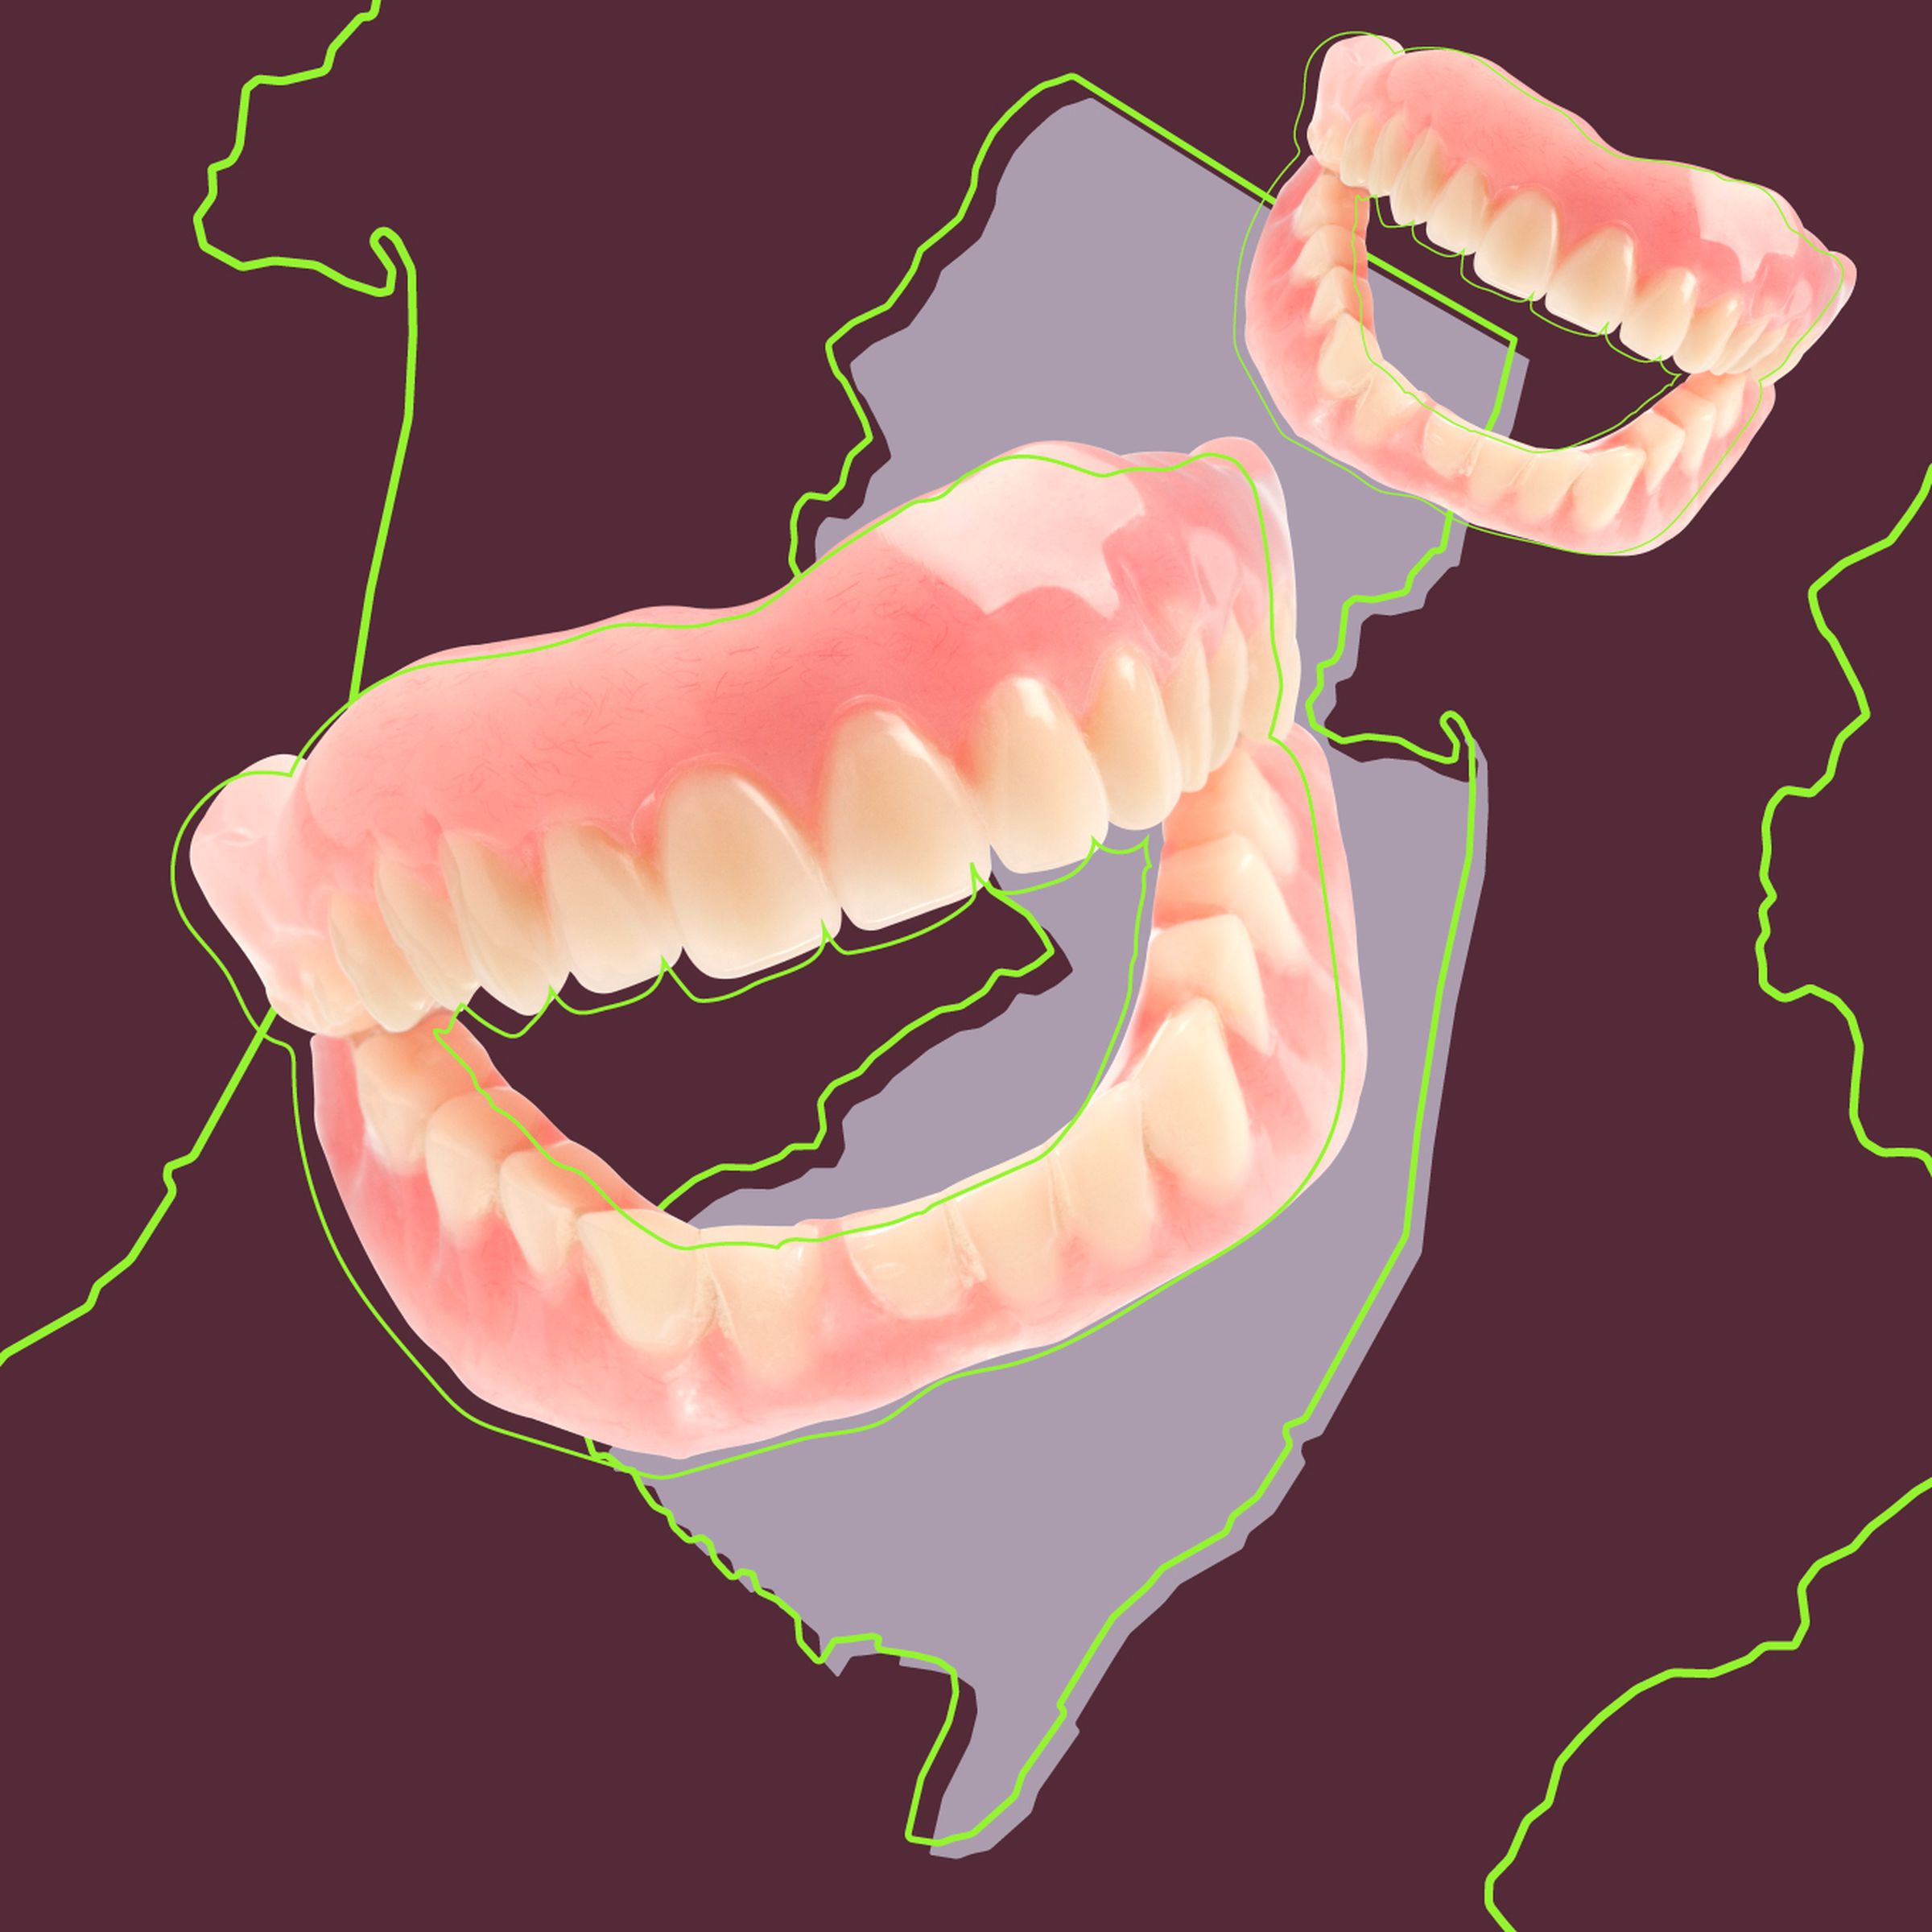 A photo showing dentures with a map of New Jersey in the background